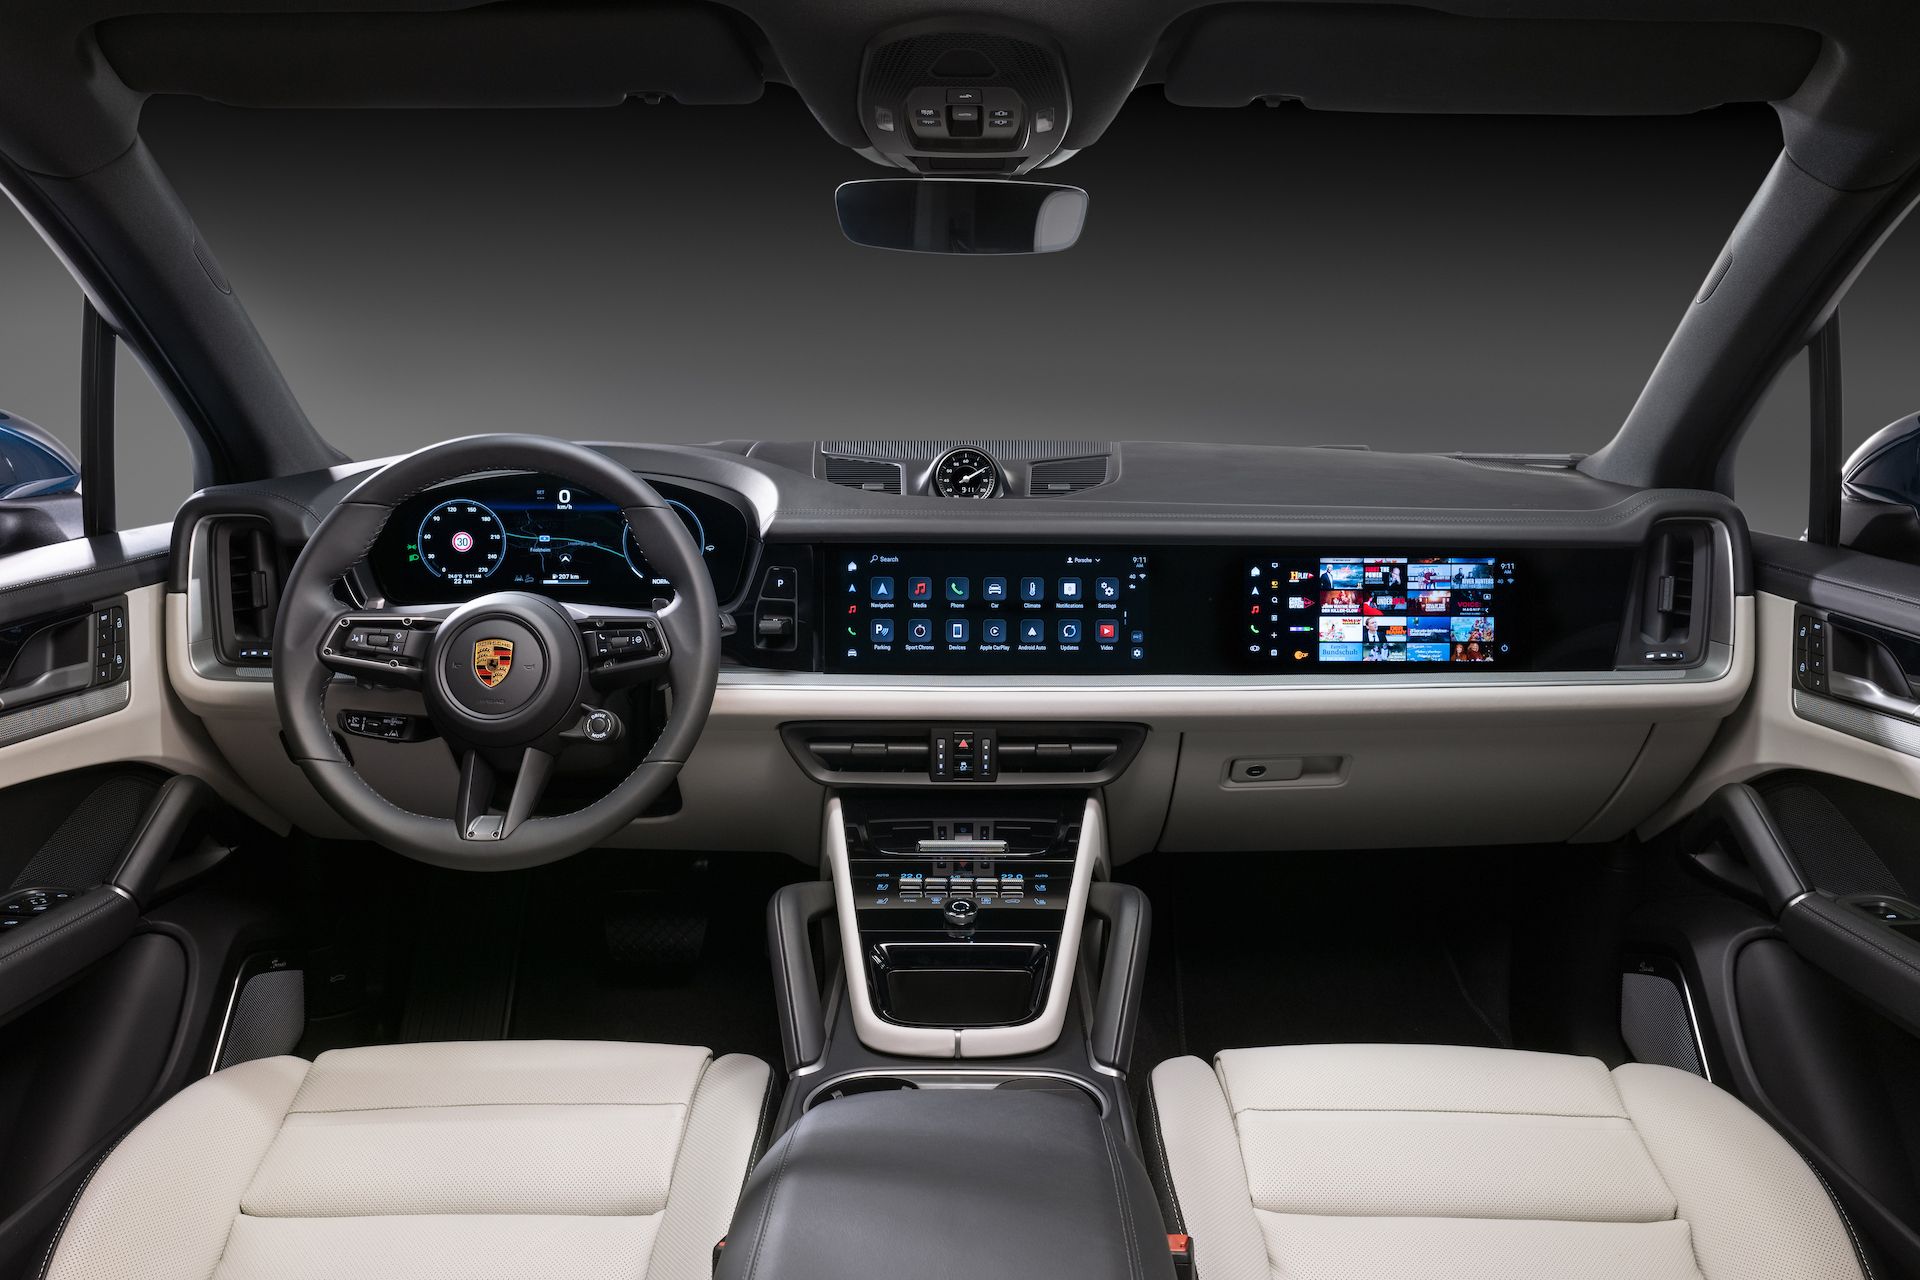 Among bells and whistles, cars shift to buttons, knobs